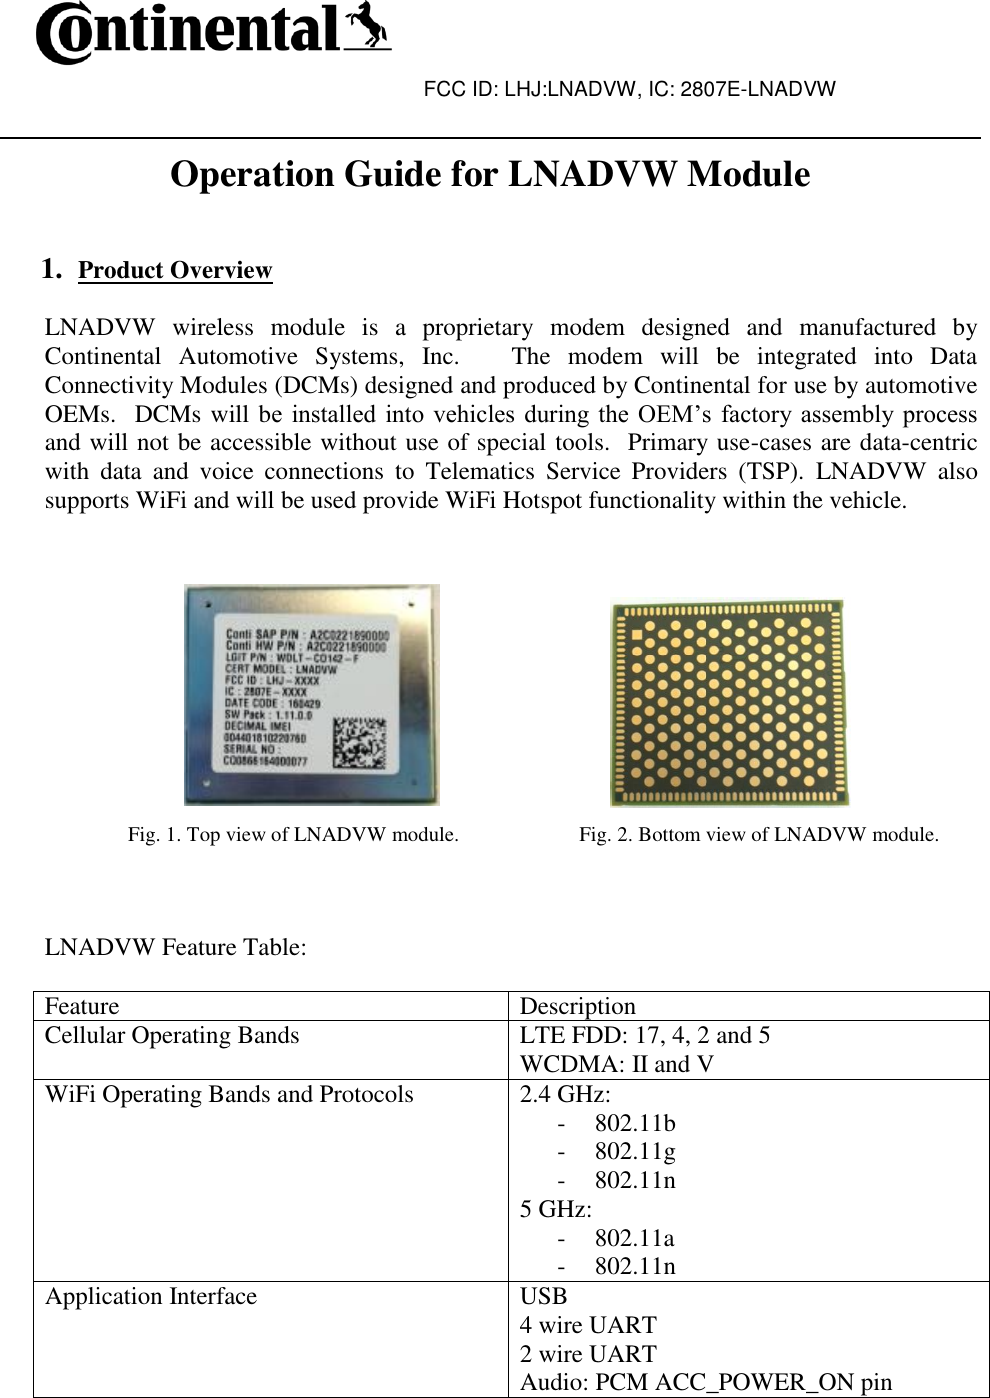 FCC ID: LHJ:LNADVW, IC: 2807E-LNADVW   Operation Guide for LNADVW Module   1. Product Overview  LNADVW  wireless  module  is  a  proprietary  modem  designed  and  manufactured  by Continental  Automotive  Systems,  Inc.      The  modem  will  be  integrated  into  Data Connectivity Modules (DCMs) designed and produced by Continental for use by automotive OEMs.  DCMs will be  installed into  vehicles during  the  OEM’s  factory  assembly process and will not be accessible without use of special tools.  Primary use-cases are data-centric with  data  and  voice  connections  to  Telematics  Service  Providers  (TSP).  LNADVW  also supports WiFi and will be used provide WiFi Hotspot functionality within the vehicle.                                                                 Fig. 1. Top view of LNADVW module.                       Fig. 2. Bottom view of LNADVW module.    LNADVW Feature Table:  Feature Description Cellular Operating Bands LTE FDD: 17, 4, 2 and 5 WCDMA: II and V WiFi Operating Bands and Protocols 2.4 GHz:  - 802.11b - 802.11g - 802.11n 5 GHz: - 802.11a - 802.11n Application Interface USB 4 wire UART 2 wire UART Audio: PCM ACC_POWER_ON pin 